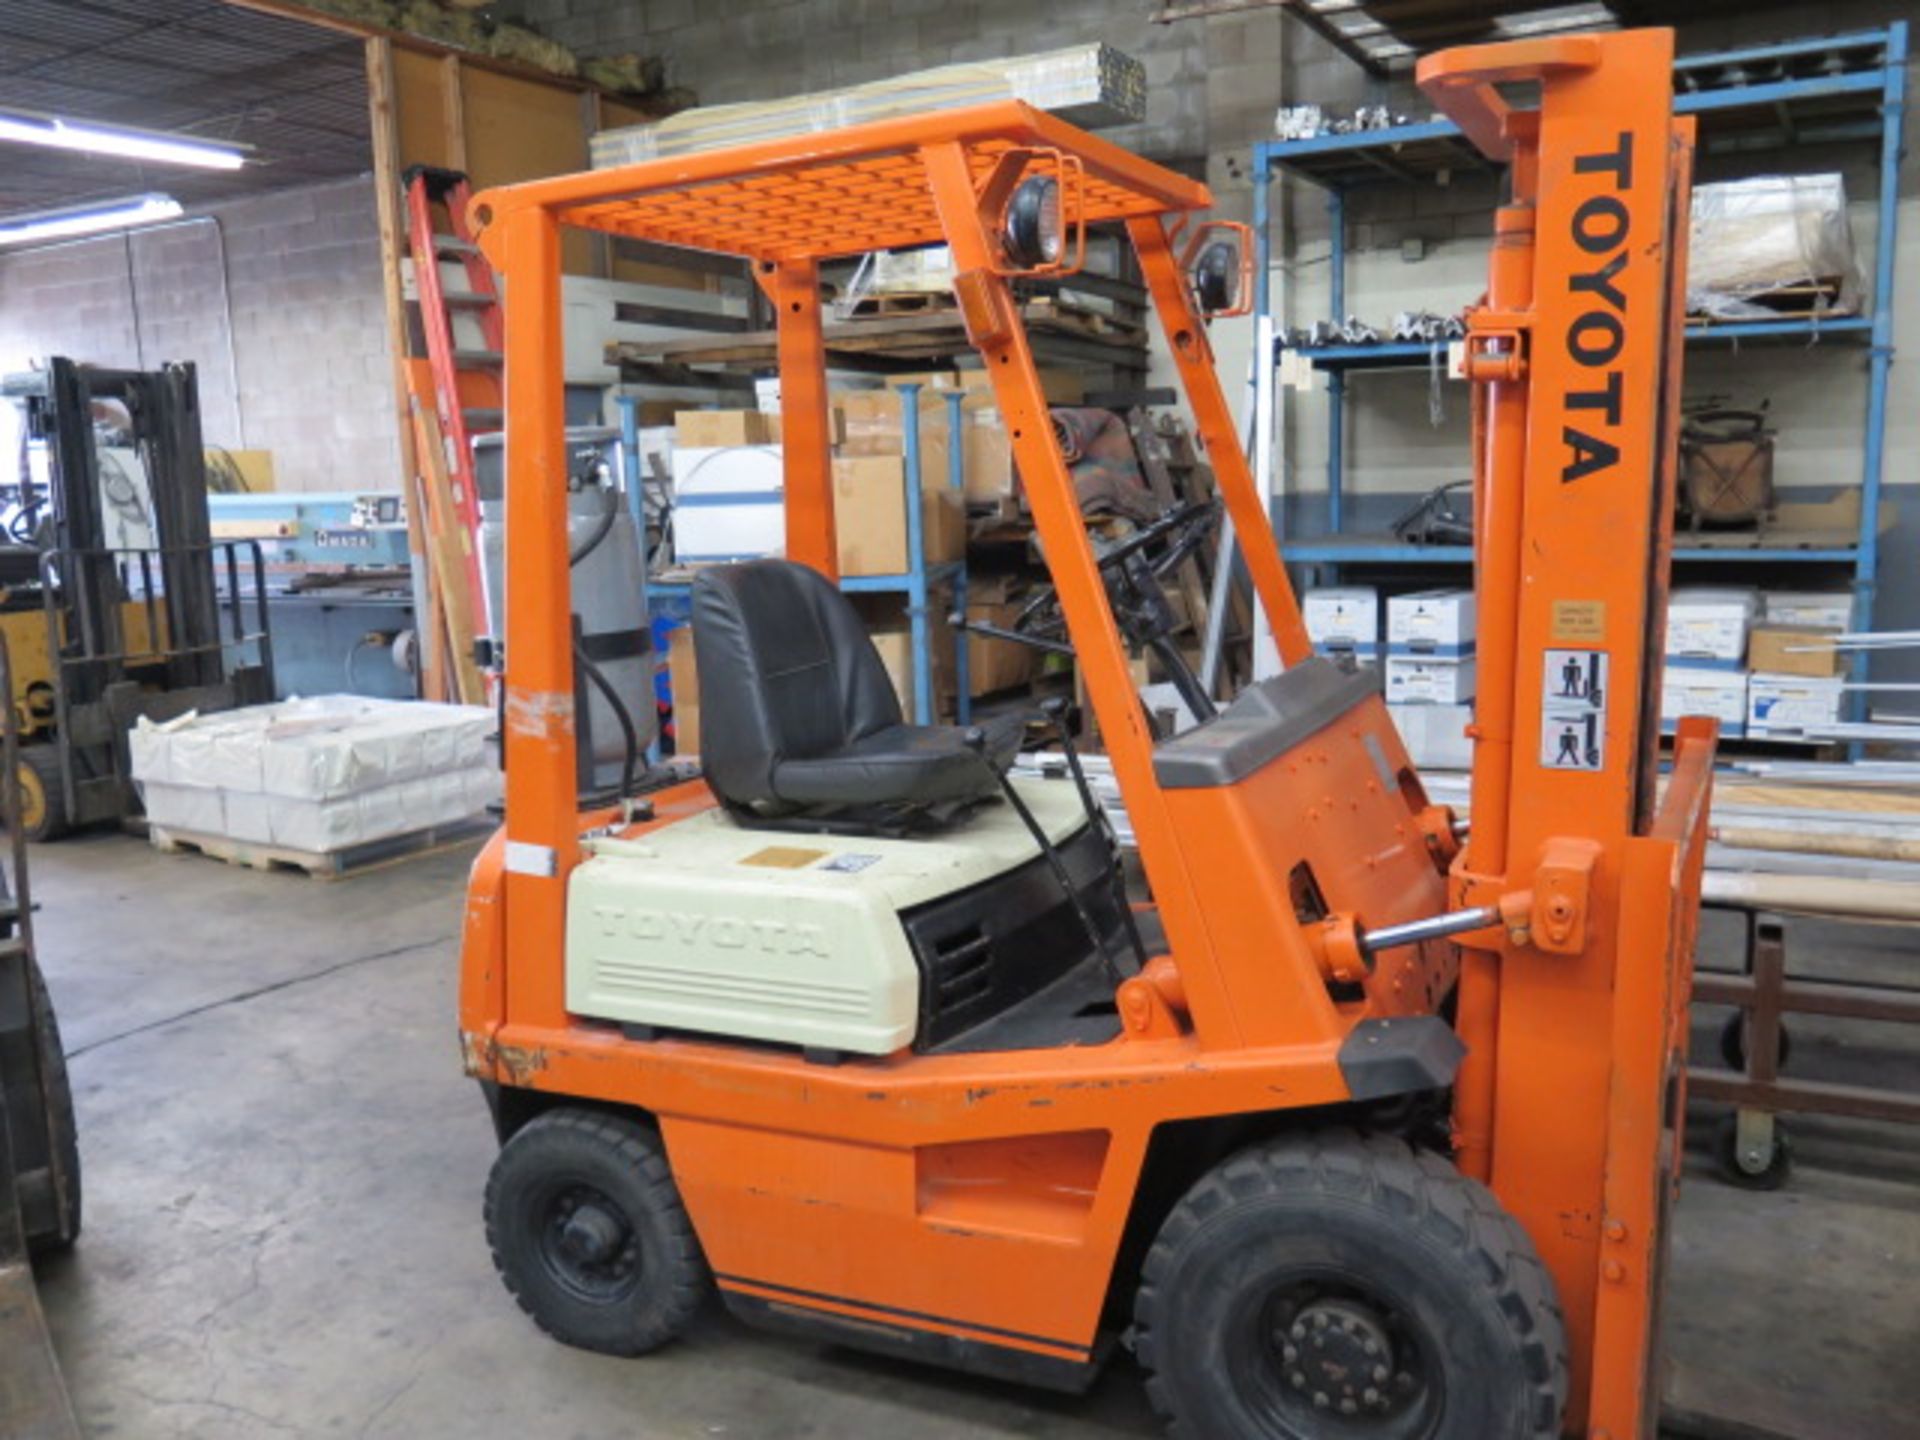 Toyota 4GL14 2500 Lb Cap LPG Forklift w/ 2-Stage Mast, 118” Lift Height, Solid Yard Tires SOLD AS IS - Image 2 of 9